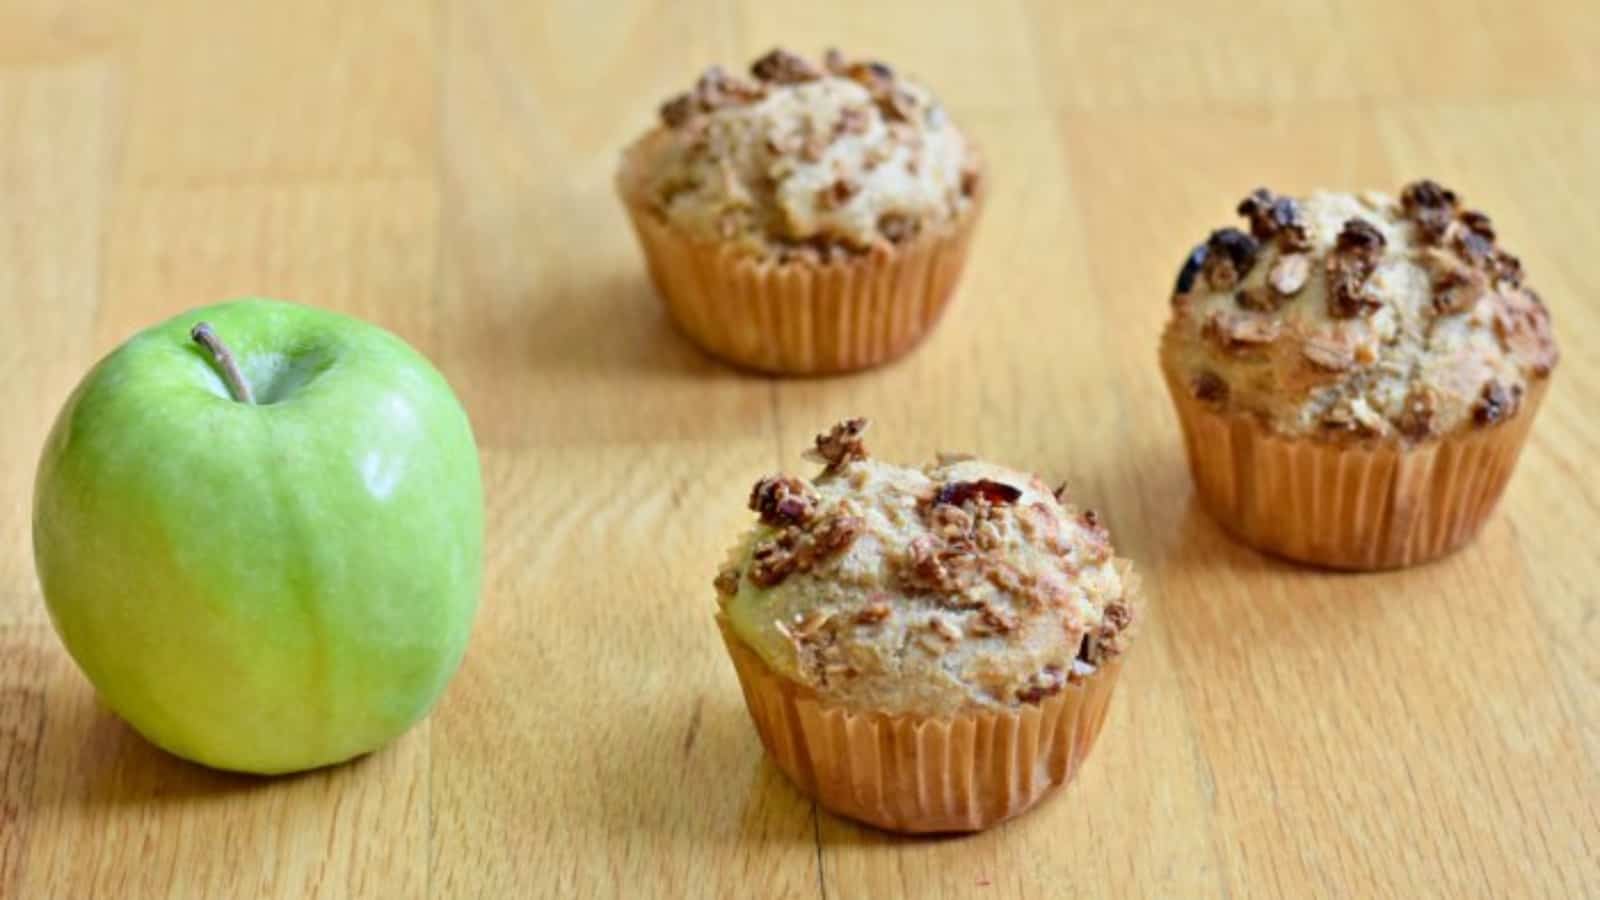 Three apple cinnamon muffins on a wooden table with an apple.